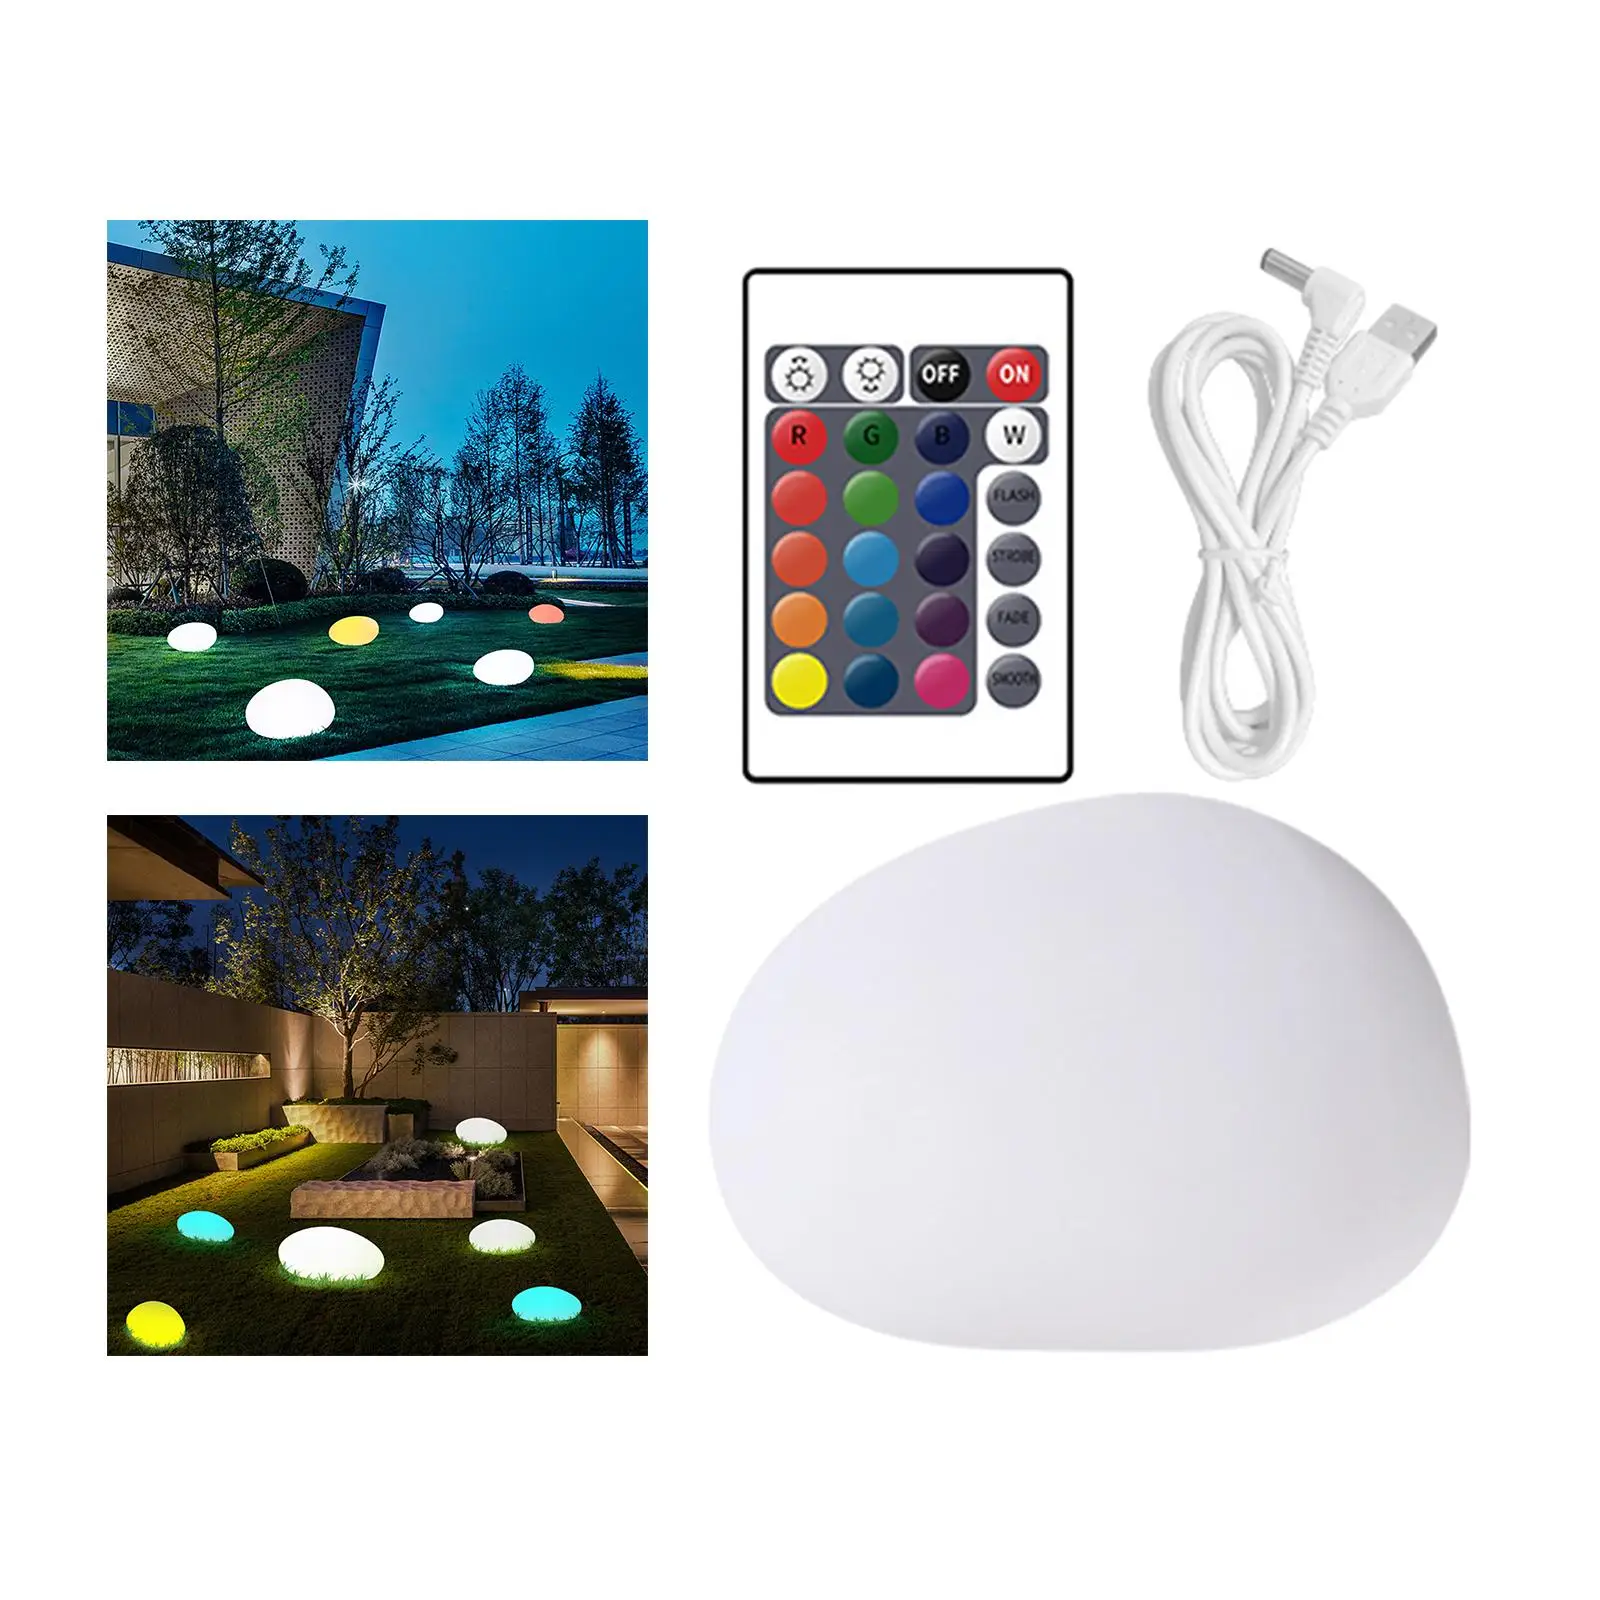 Outdoor Glow Cobble Stone Shape Lamp Lights Color Changing Landscape Night Lights for Festival Poolside Kids Room Party Decor